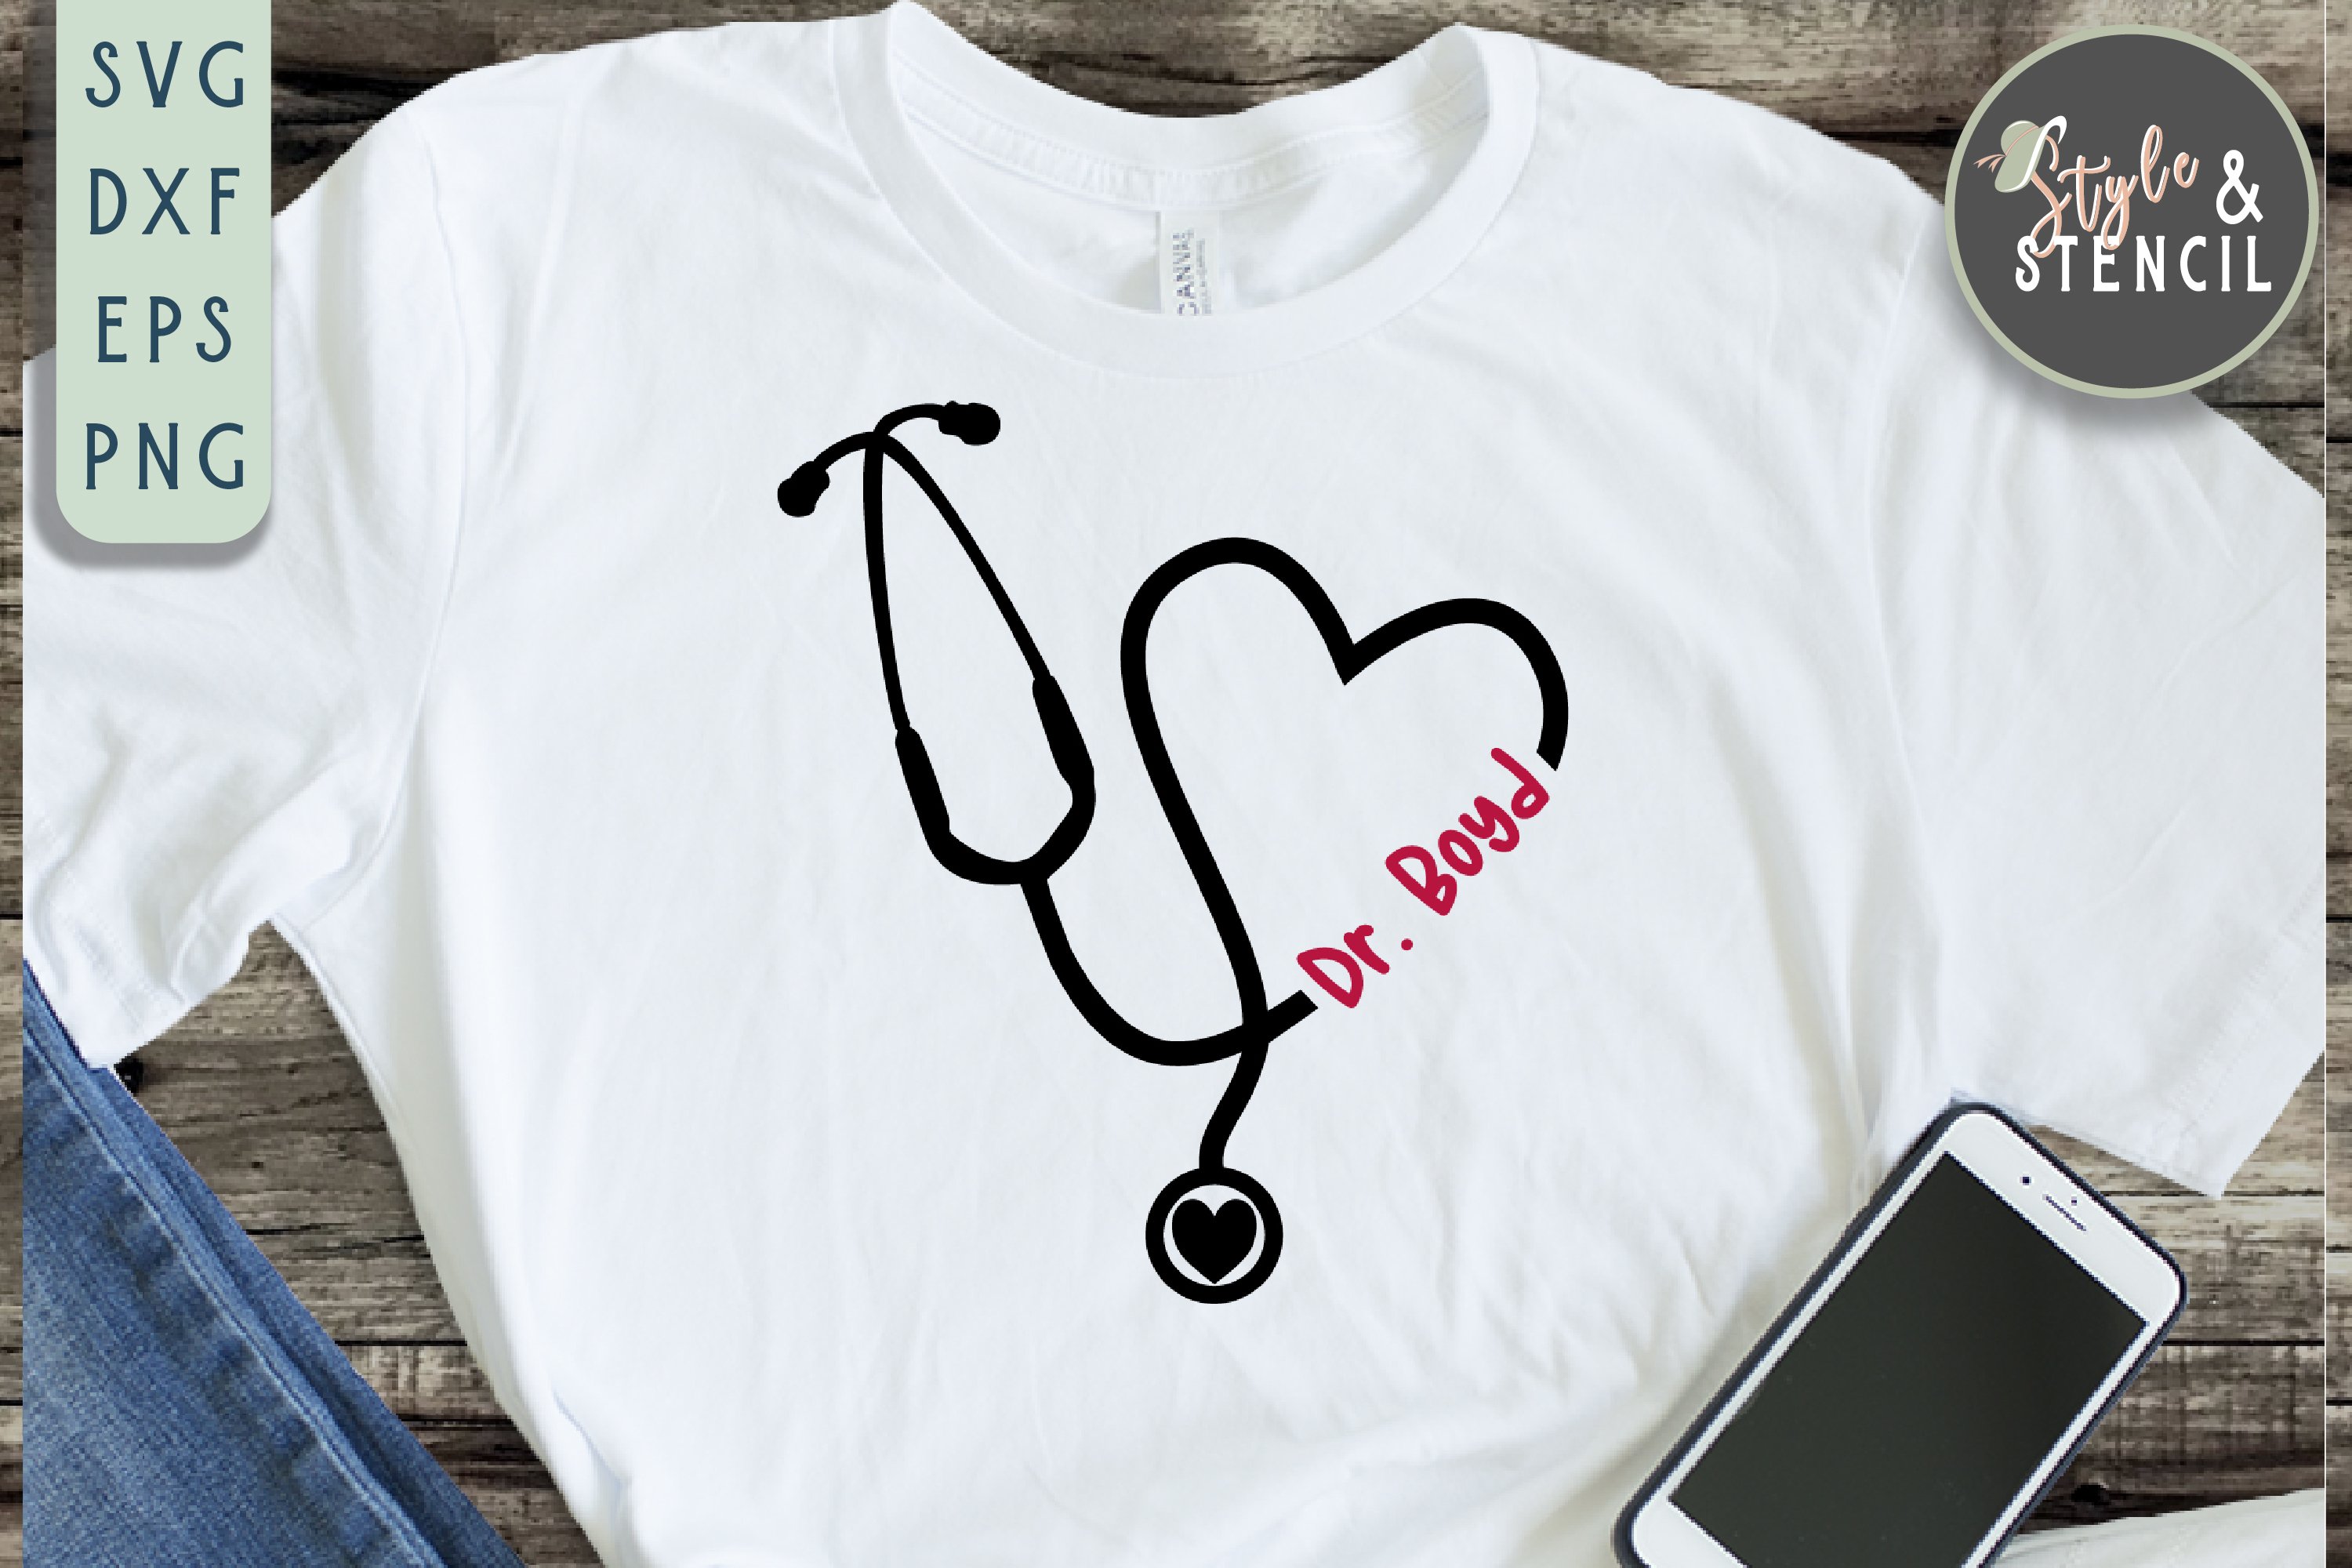 White t-shirt cloth with a stethoscope.